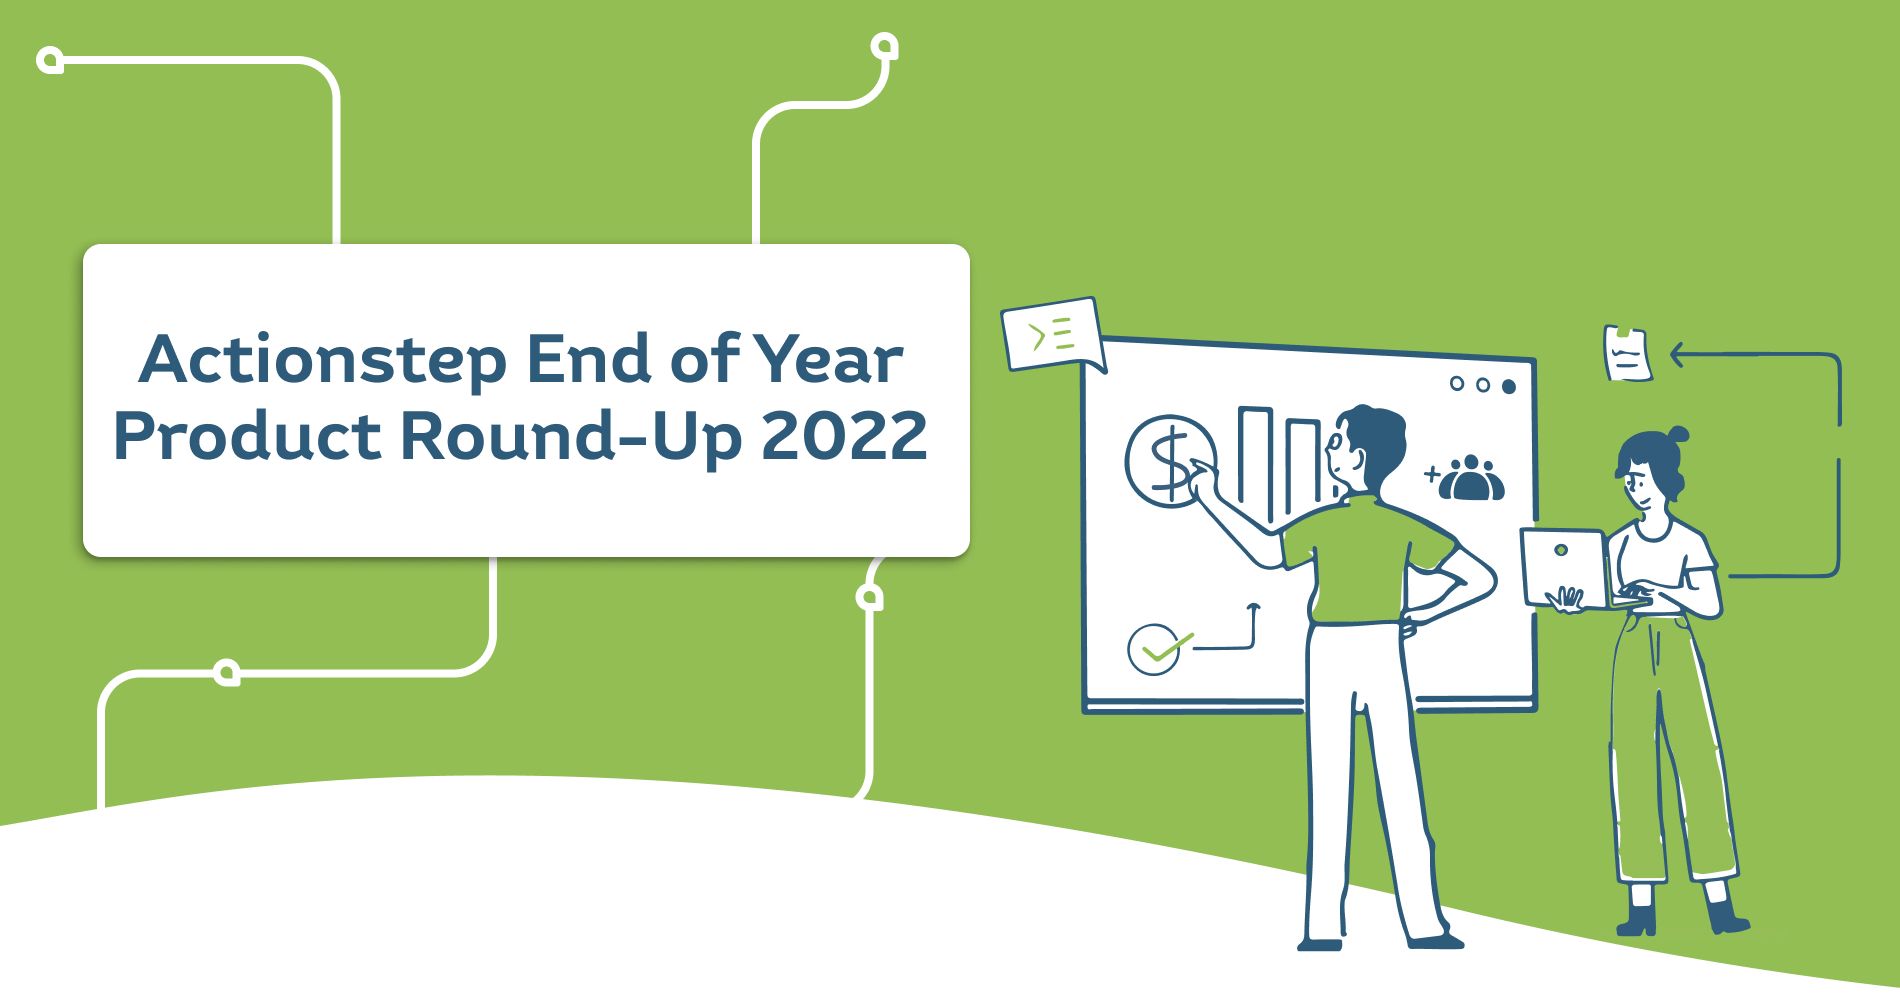 Actionstep End of Year Product Round-Up 2022